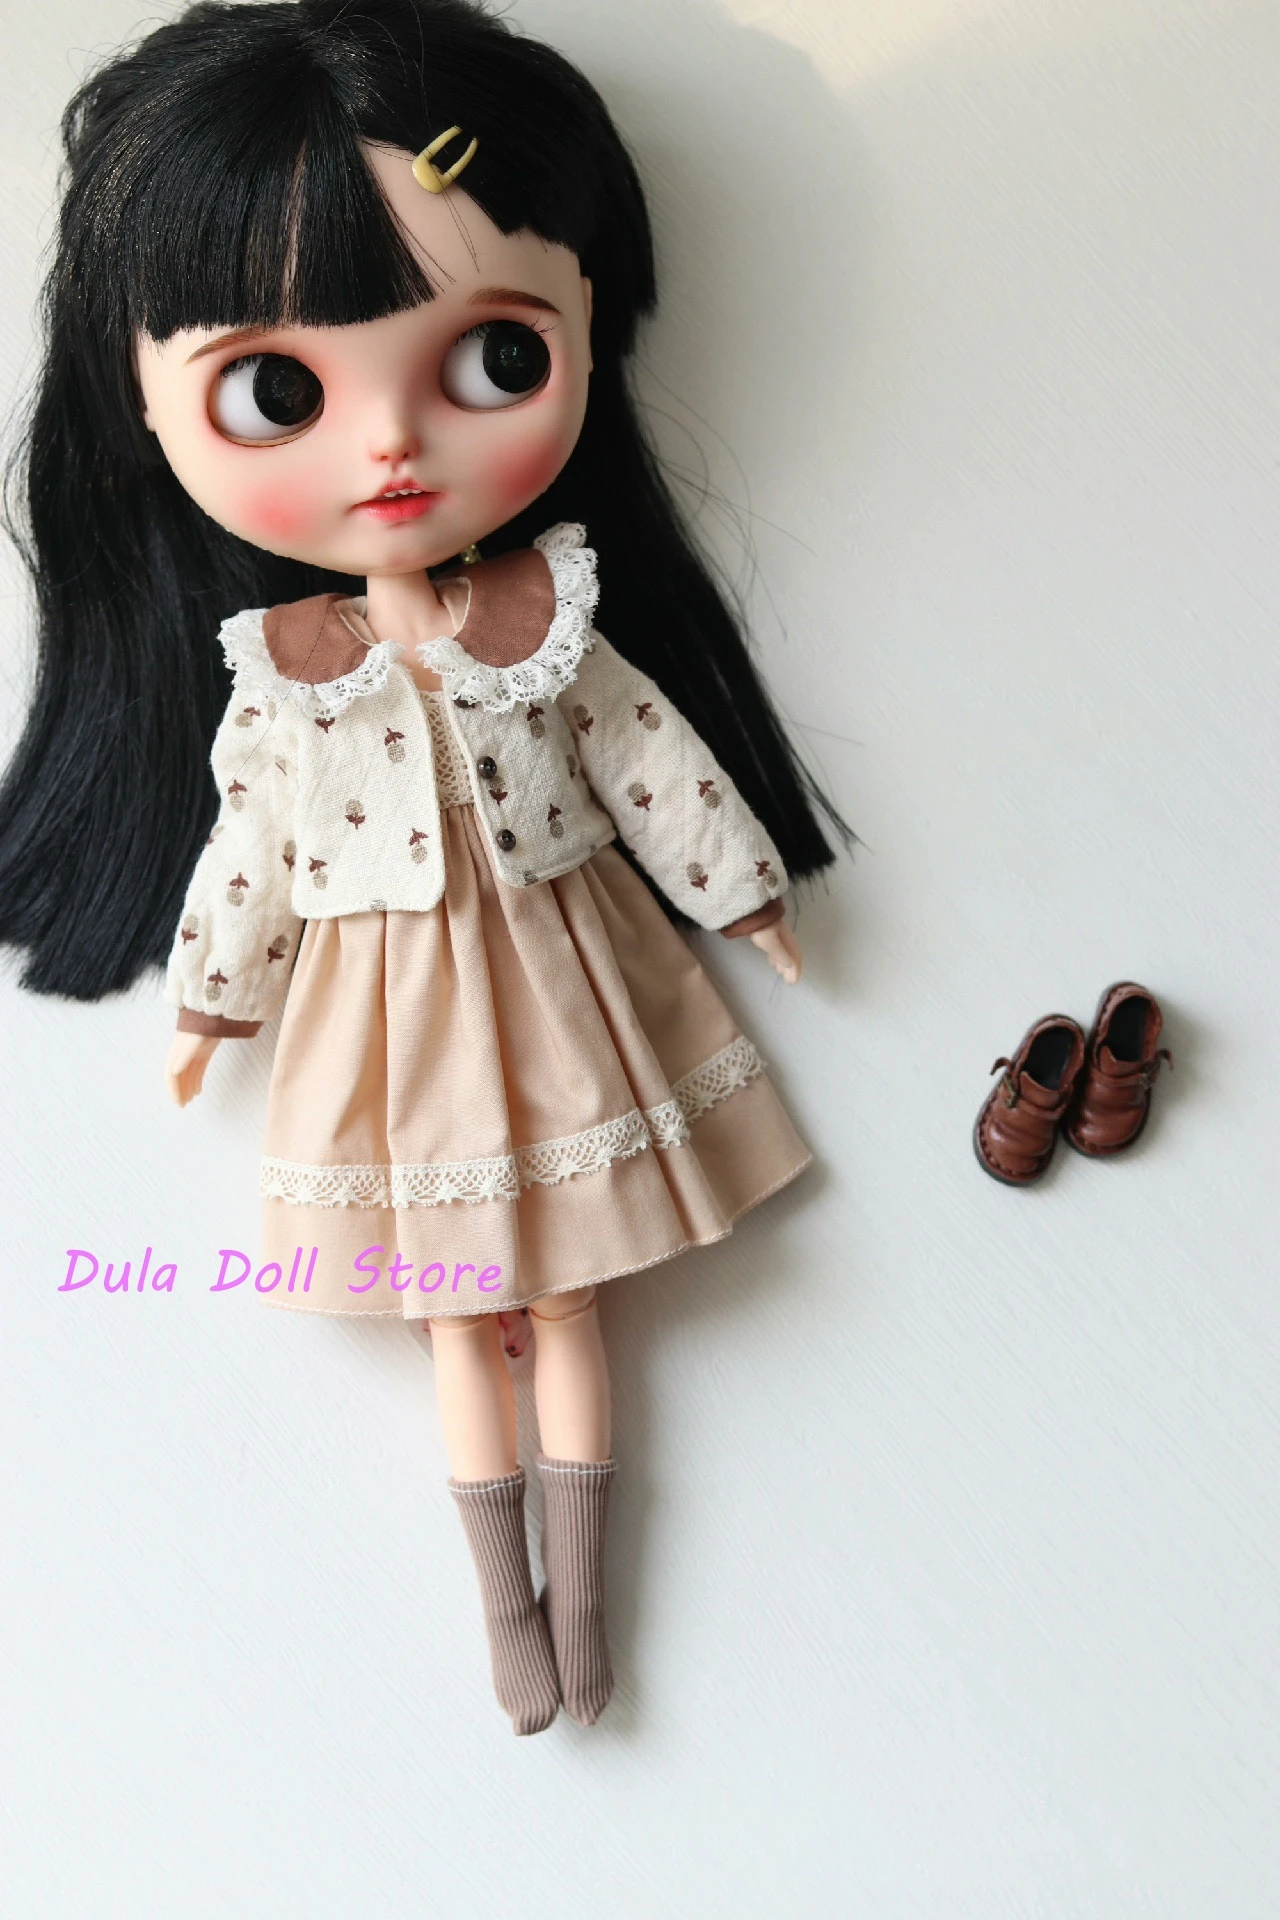 

Dula Doll Clothes Dress Pine cone brown coat skirt Blythe Qbaby ob24 ob22 ob11 Azone Licca ICY JerryB 1/6 Bjd Doll Accessories